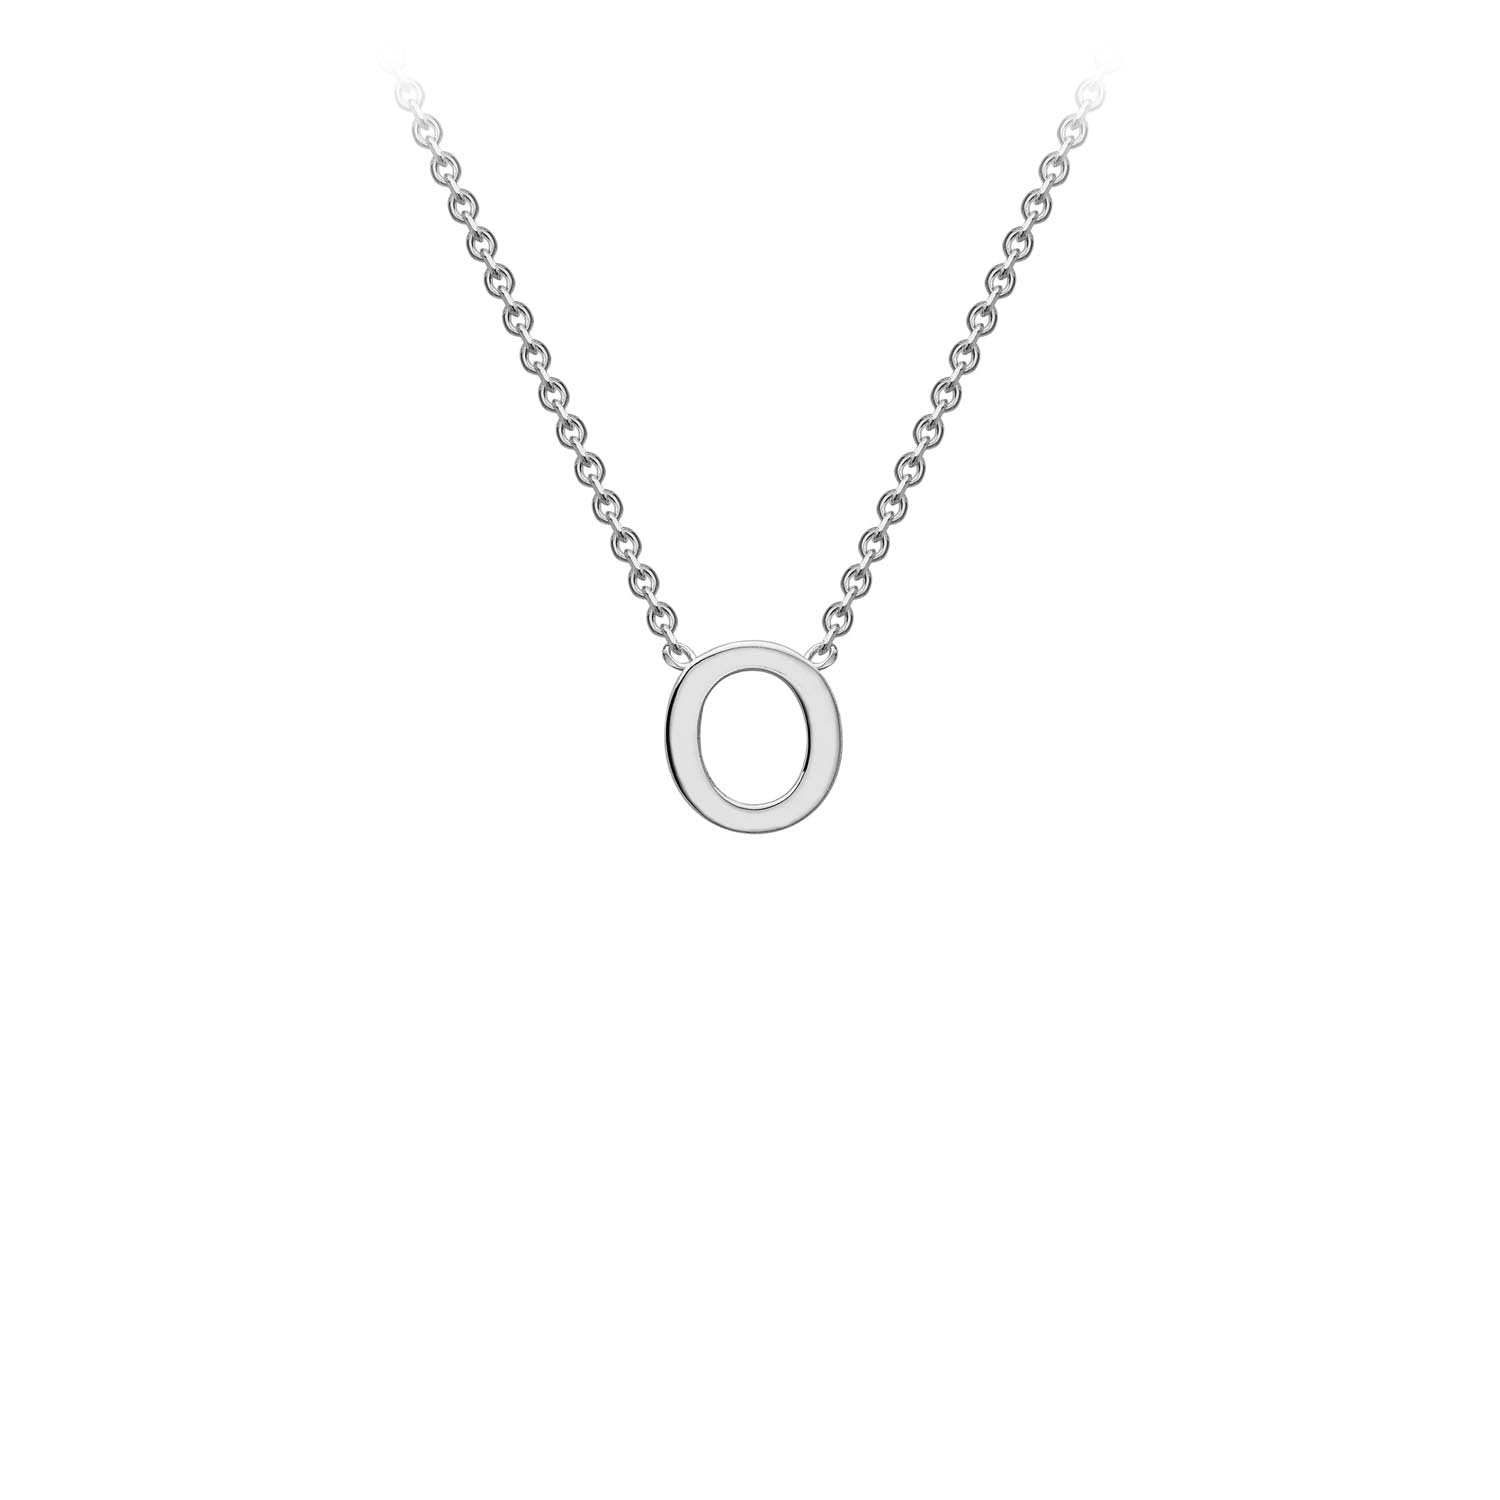 9ct White Gold 'O' Initial Adjustable Letter Necklace 38/43cm